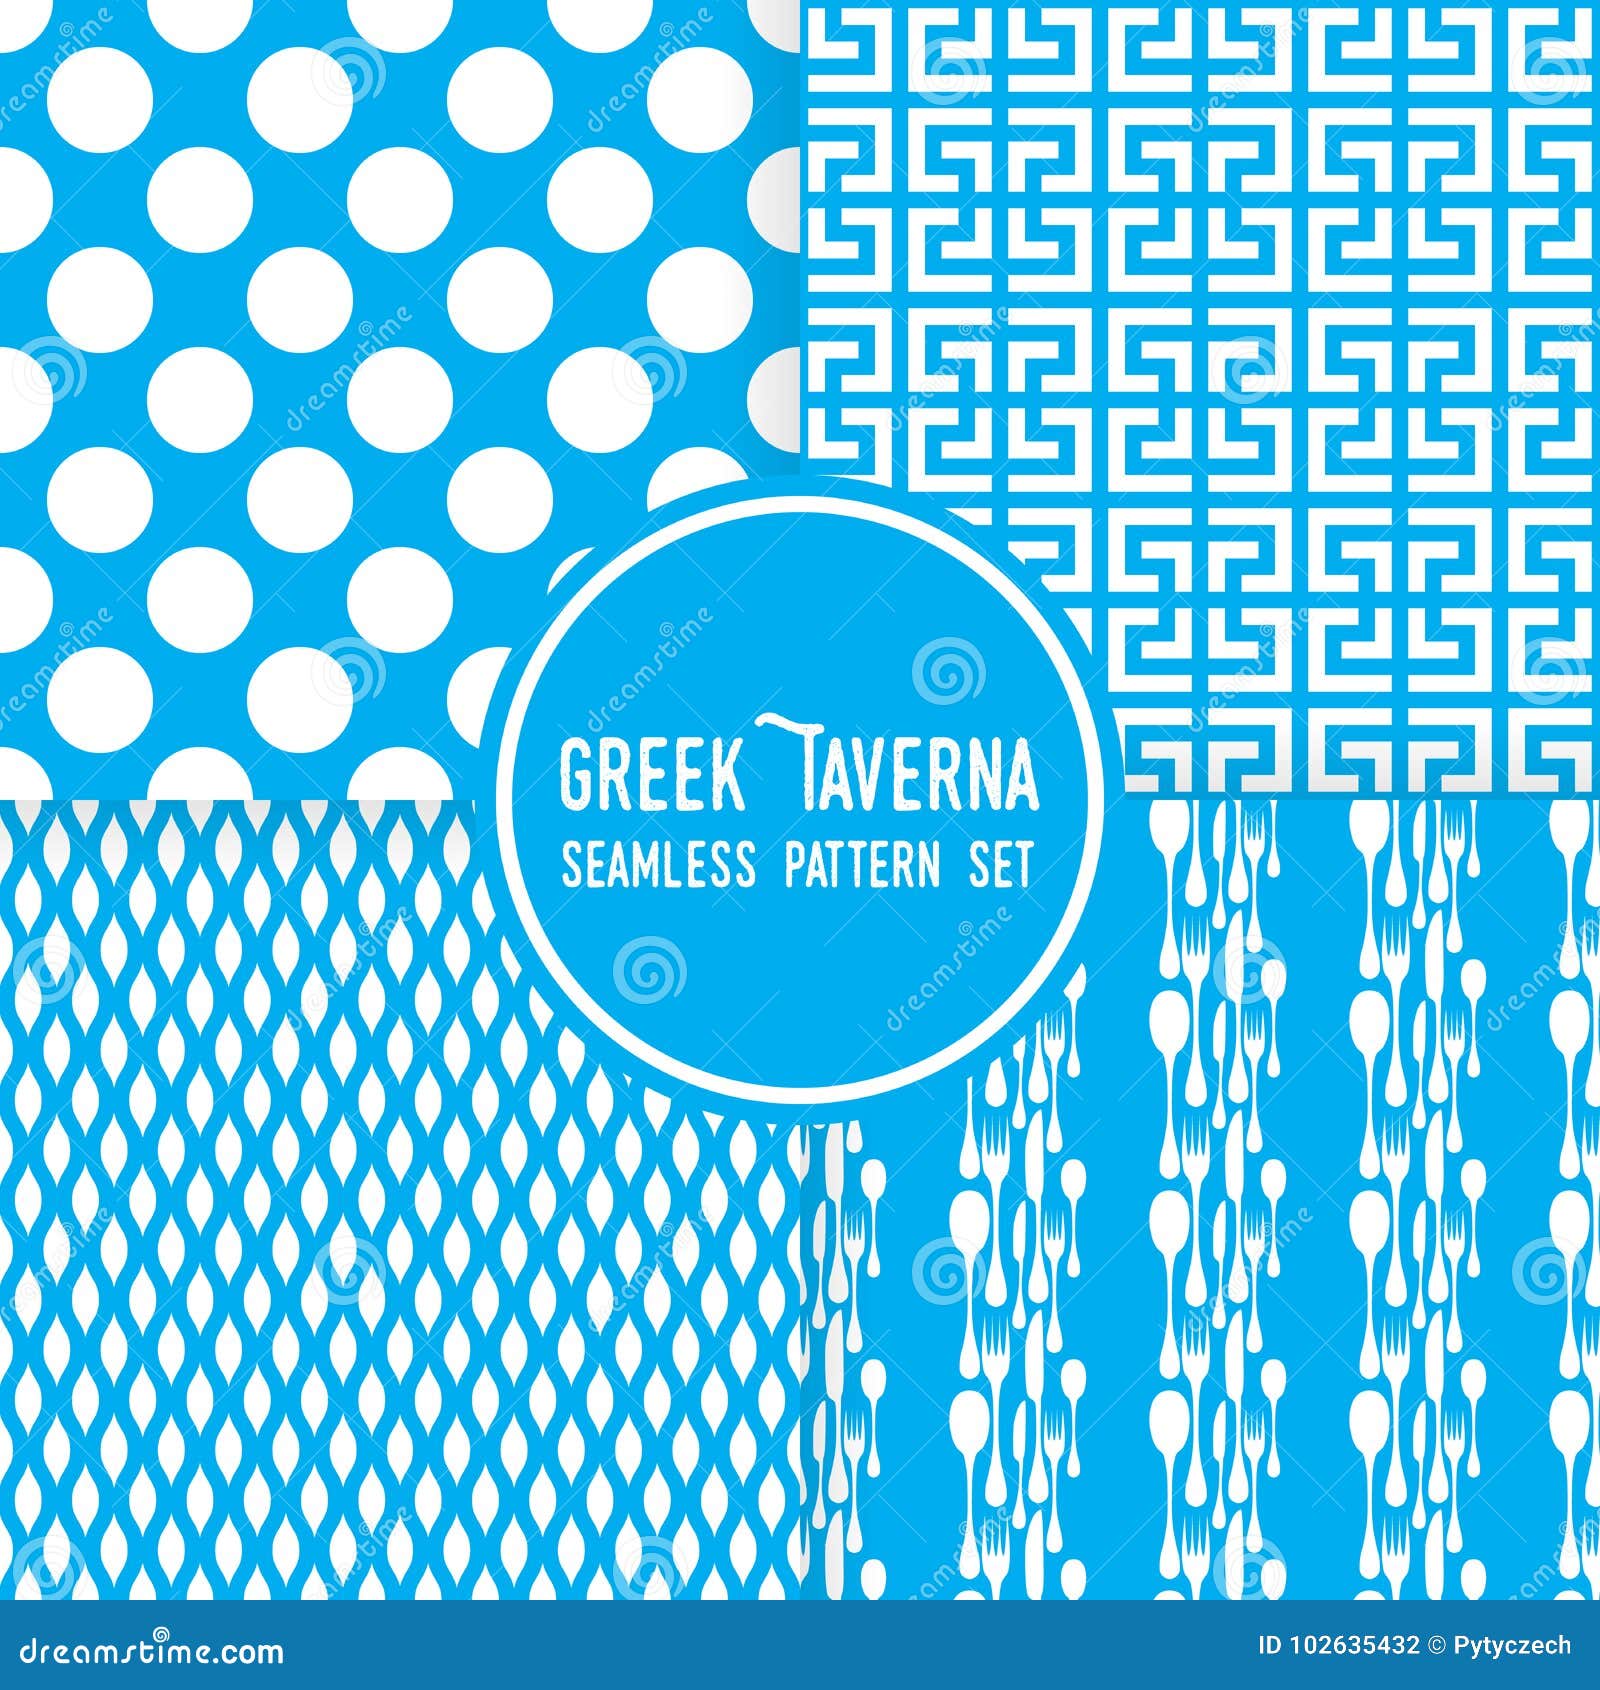 Blue Greek Tavern Theme. Ornaments, Dots And Cutlery Shapes. Seamless